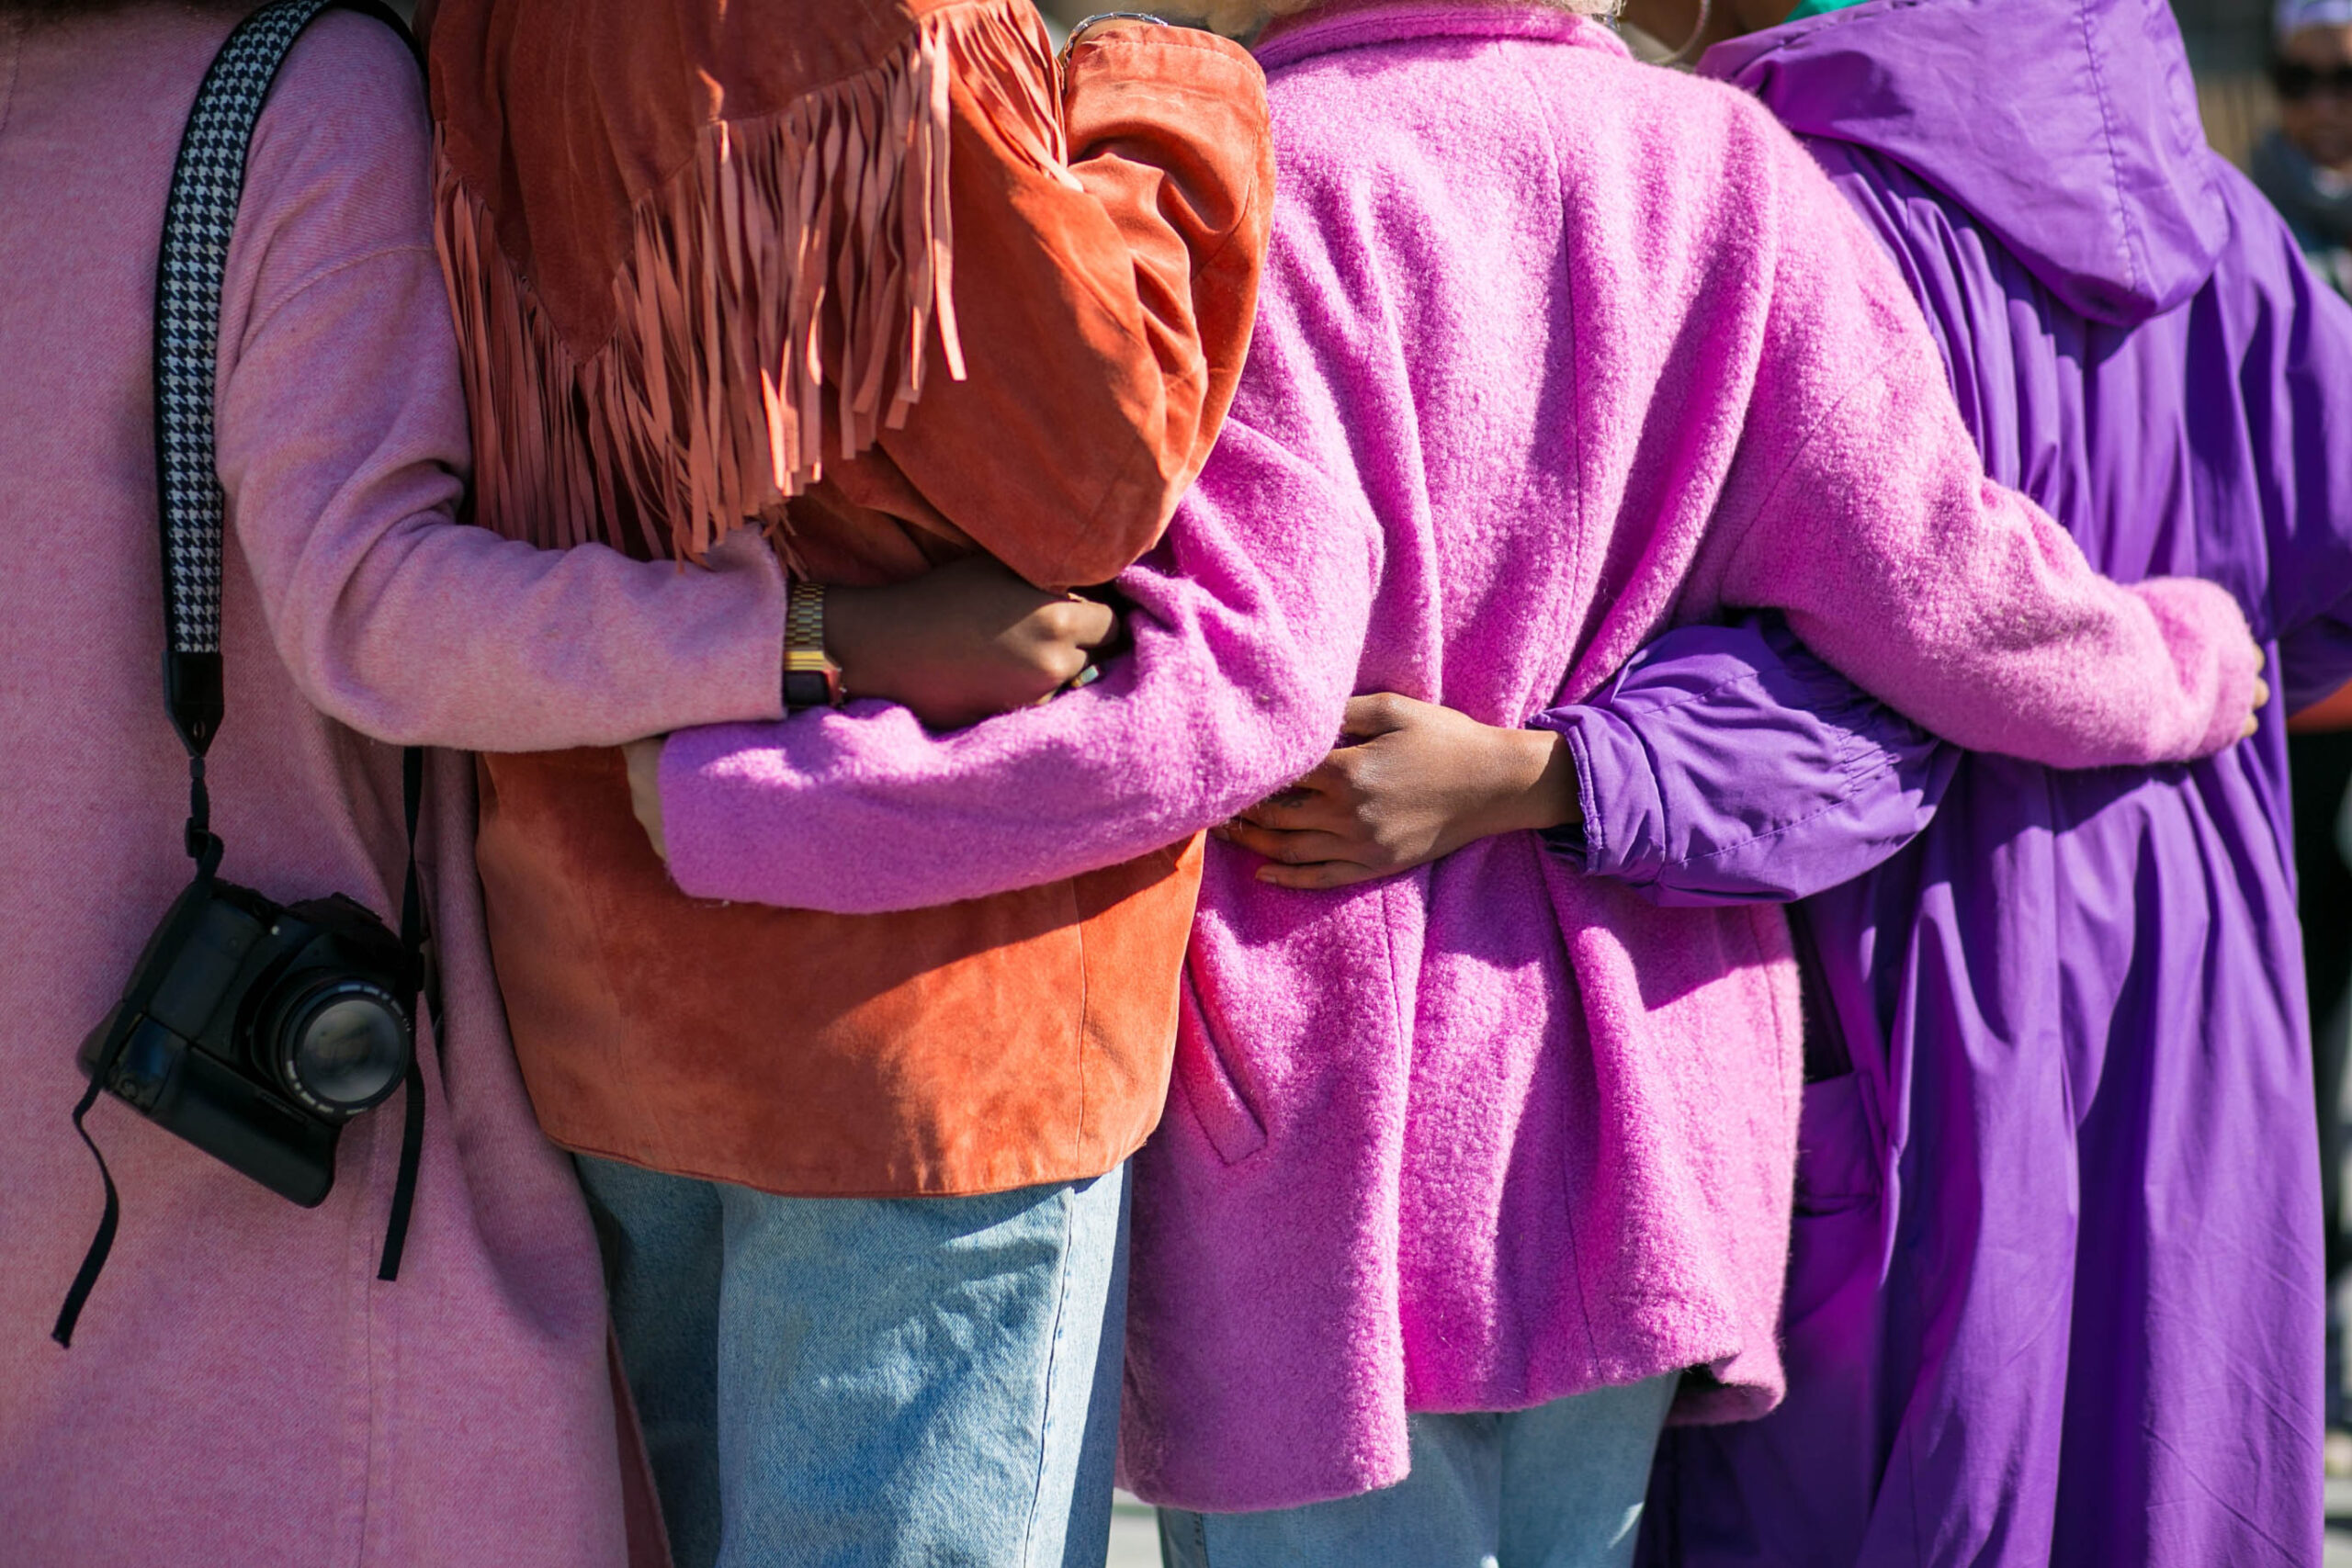 A view of four women in pink and purple coats hugging supportively.